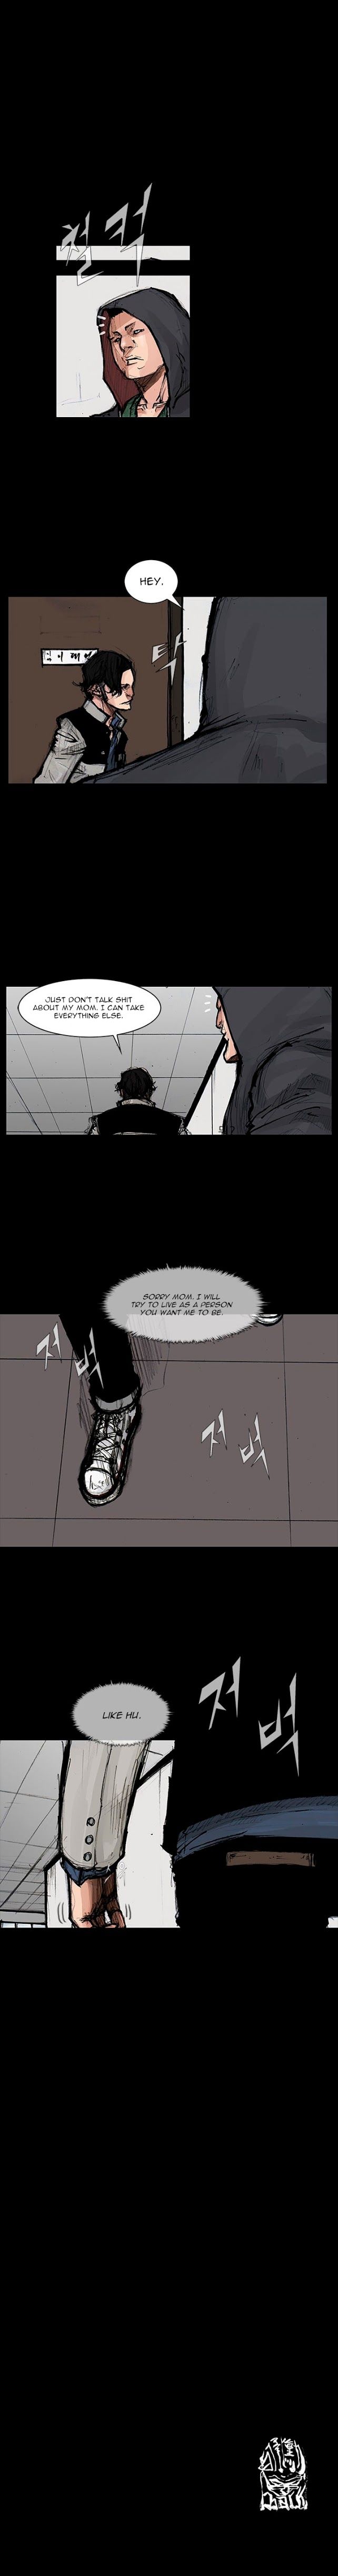 Dokgo 2 Chapter 12 Page 17